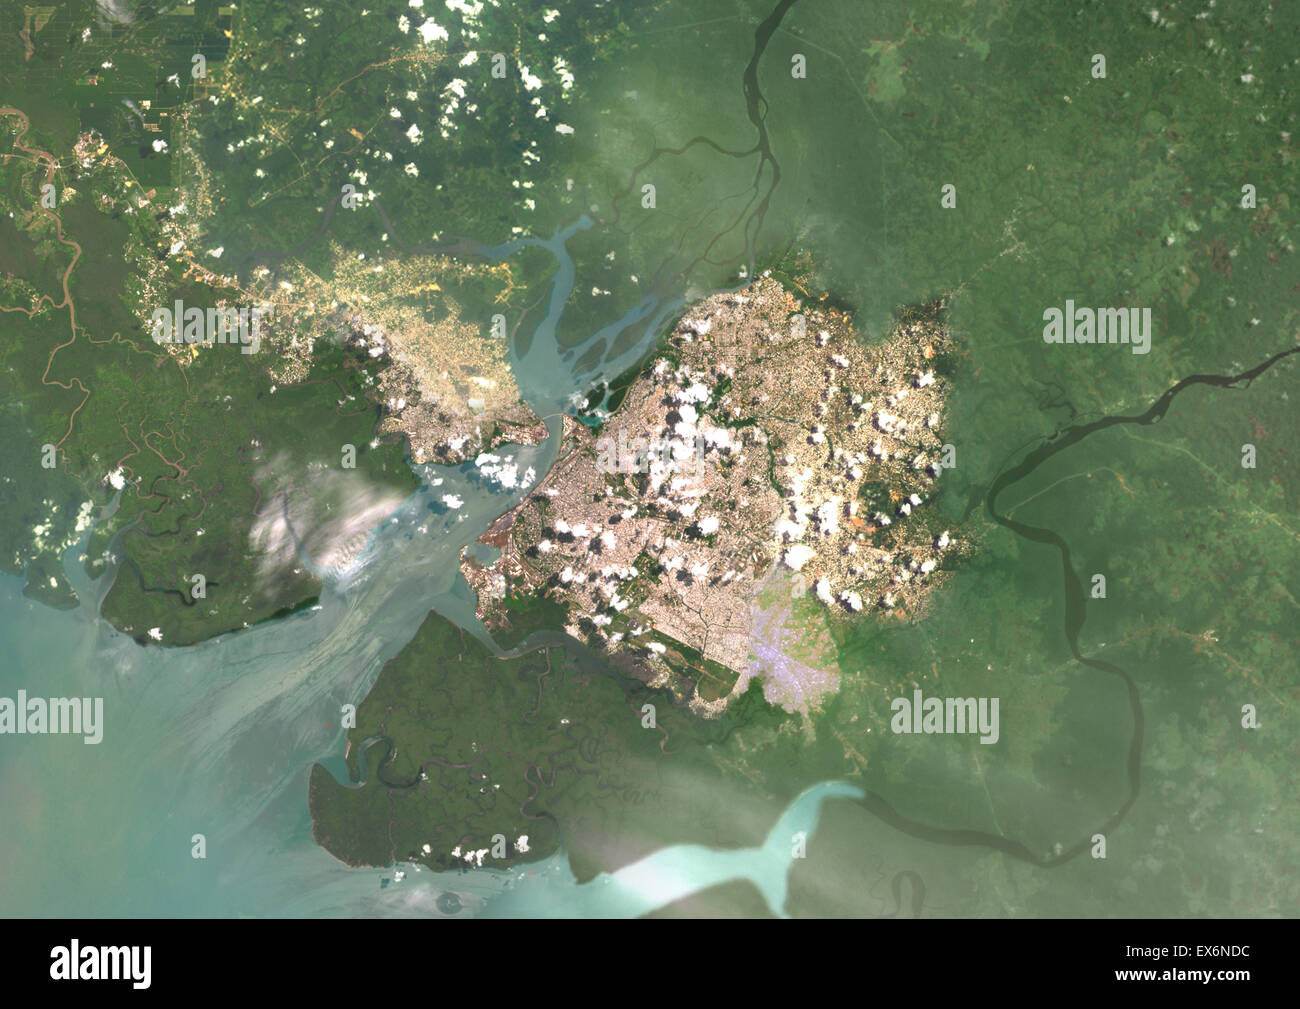 Colour satellite image of Douala, Cameroon. Image taken on May 15, 2014 with Landsat 8 data. Stock Photo